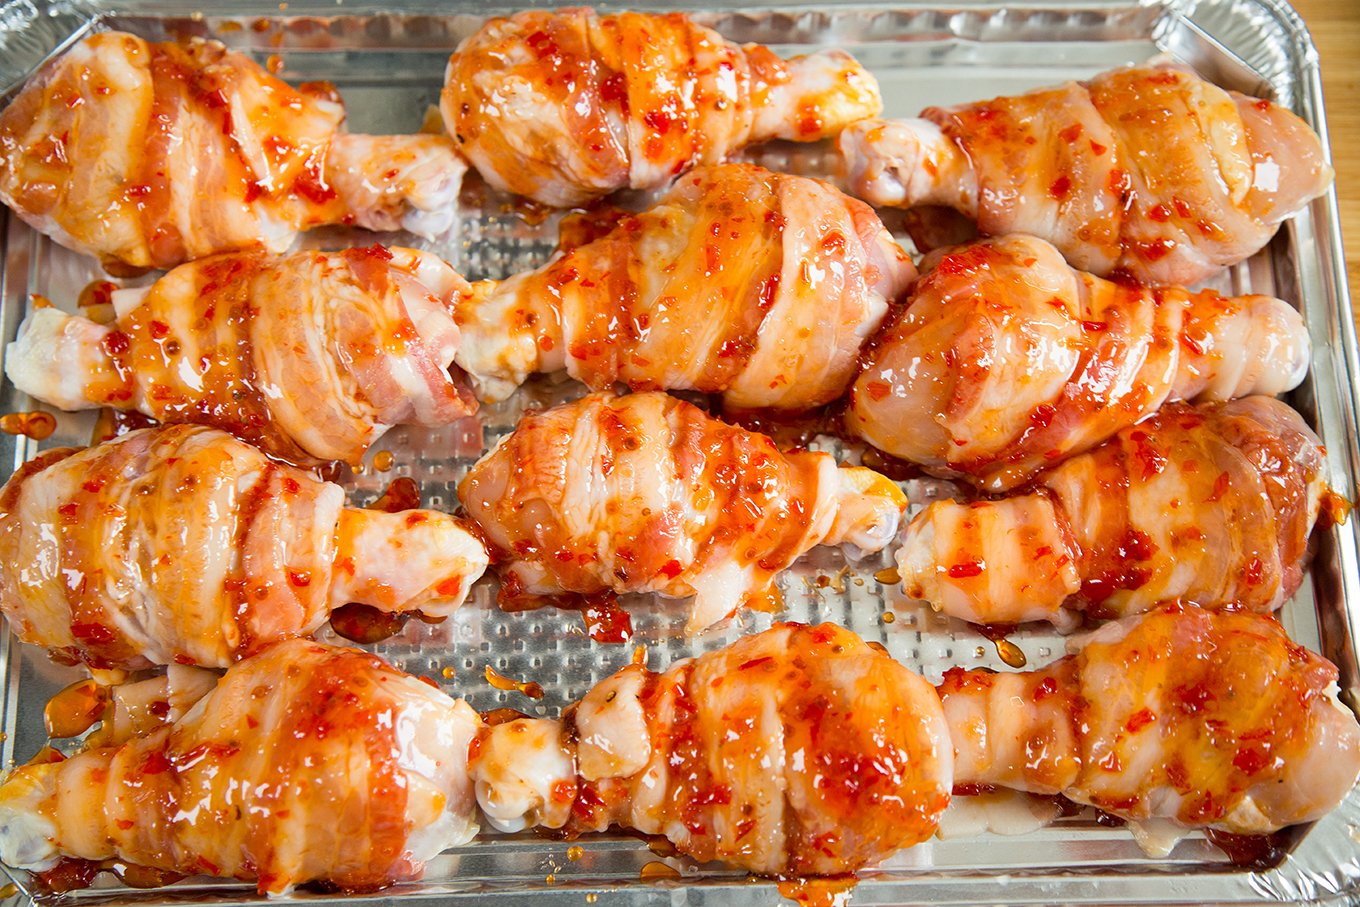 Bacon wrapped chicken legs with a sweet chili glaze on a foil baking sheet